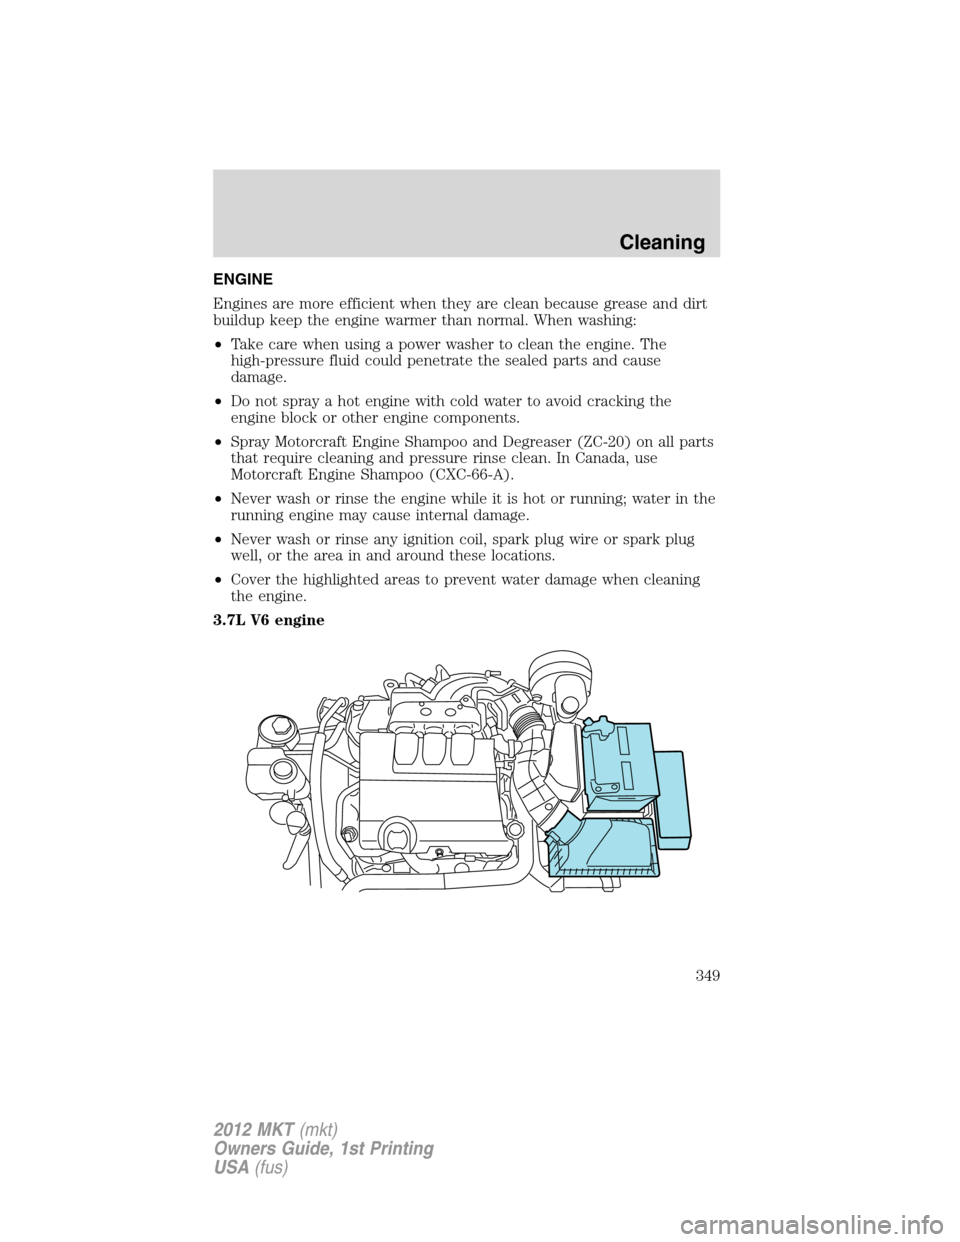 LINCOLN MKT 2012  Owners Manual ENGINE
Engines are more efficient when they are clean because grease and dirt
buildup keep the engine warmer than normal. When washing:
•Take care when using a power washer to clean the engine. The
